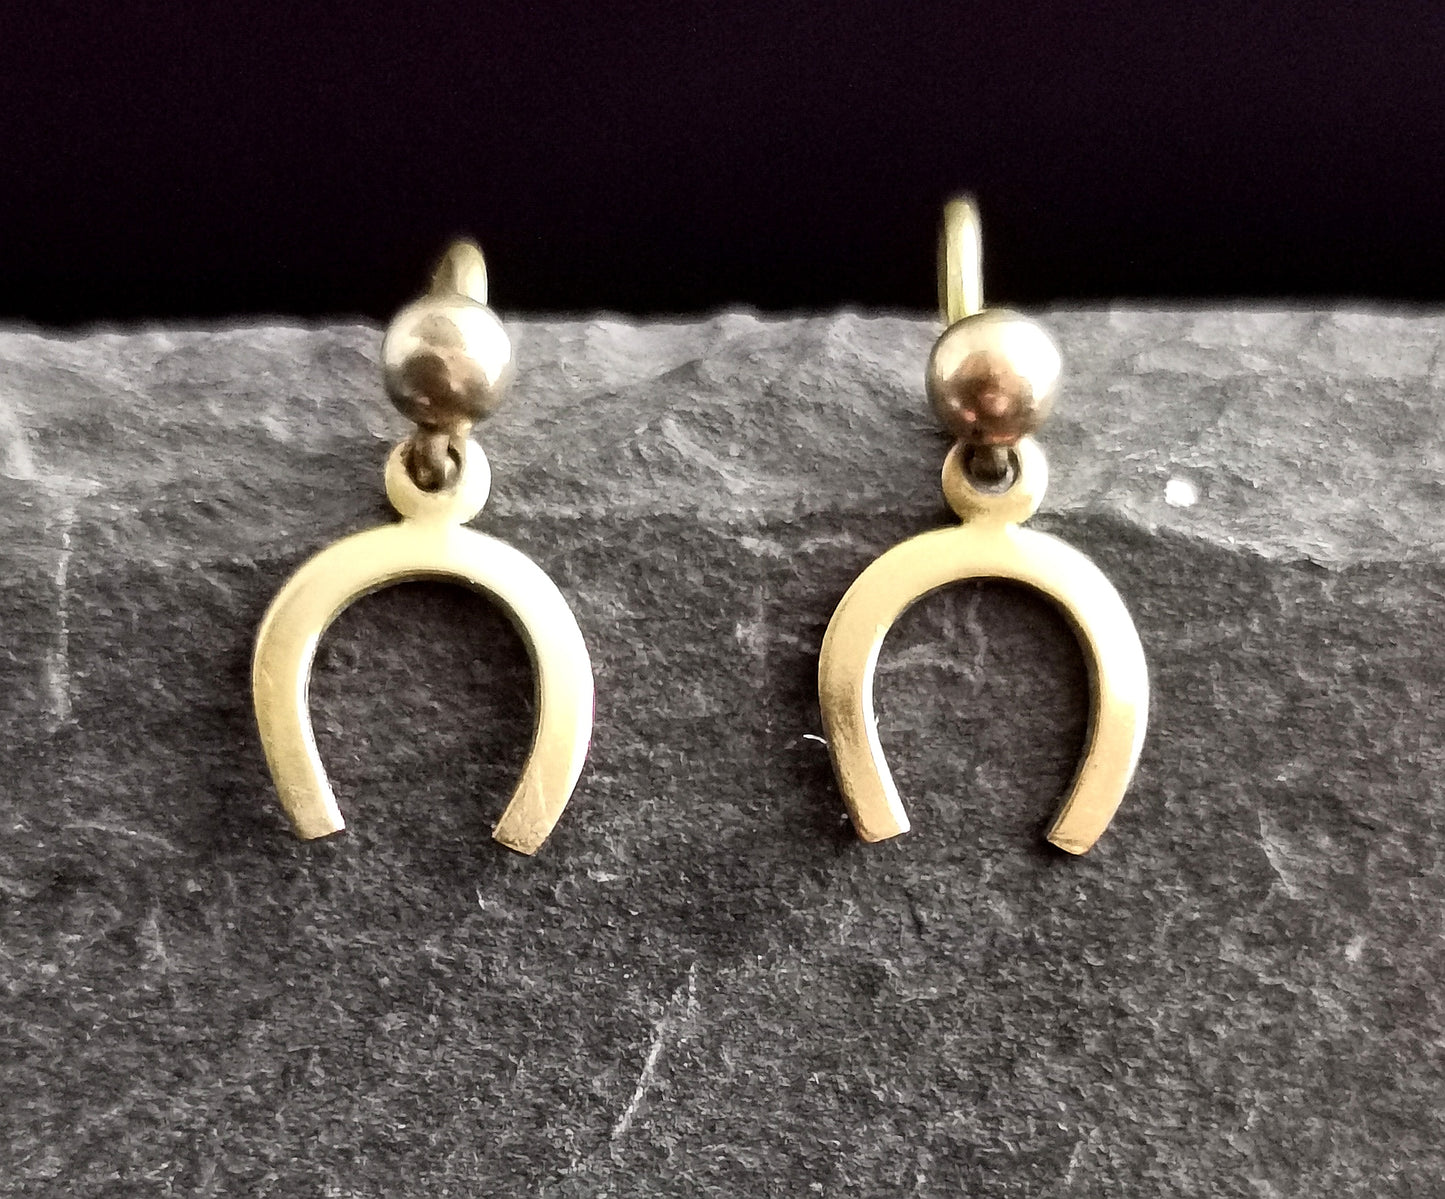 Antique 9ct yellow gold horseshoe earrings, Dainty, Victorian